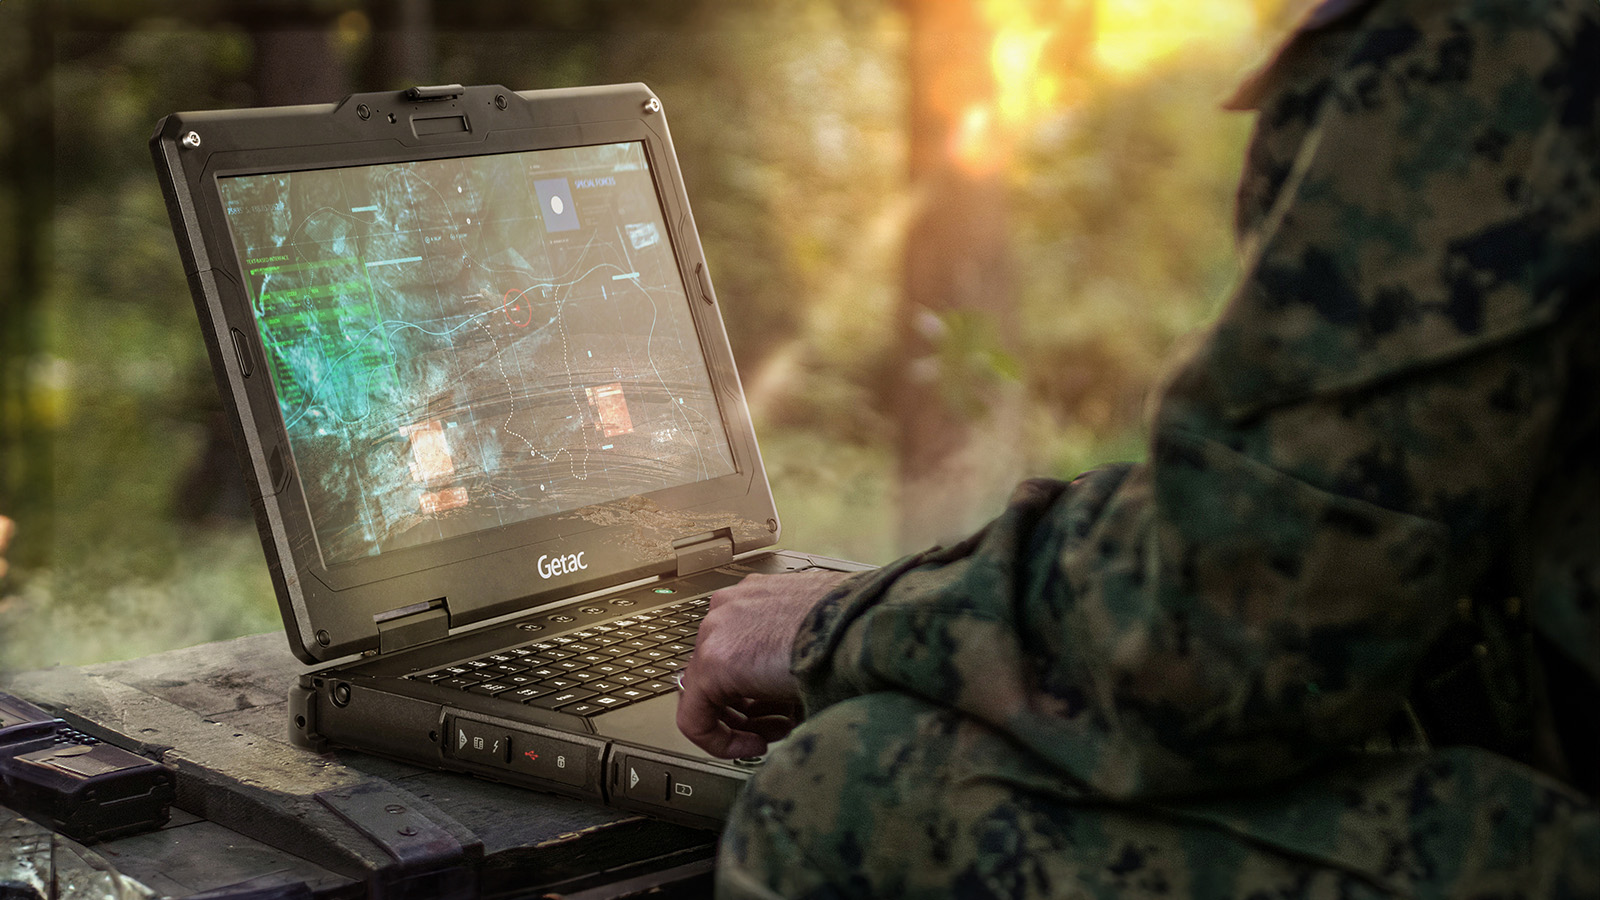 X600 Fully-rugged mobile workstation series